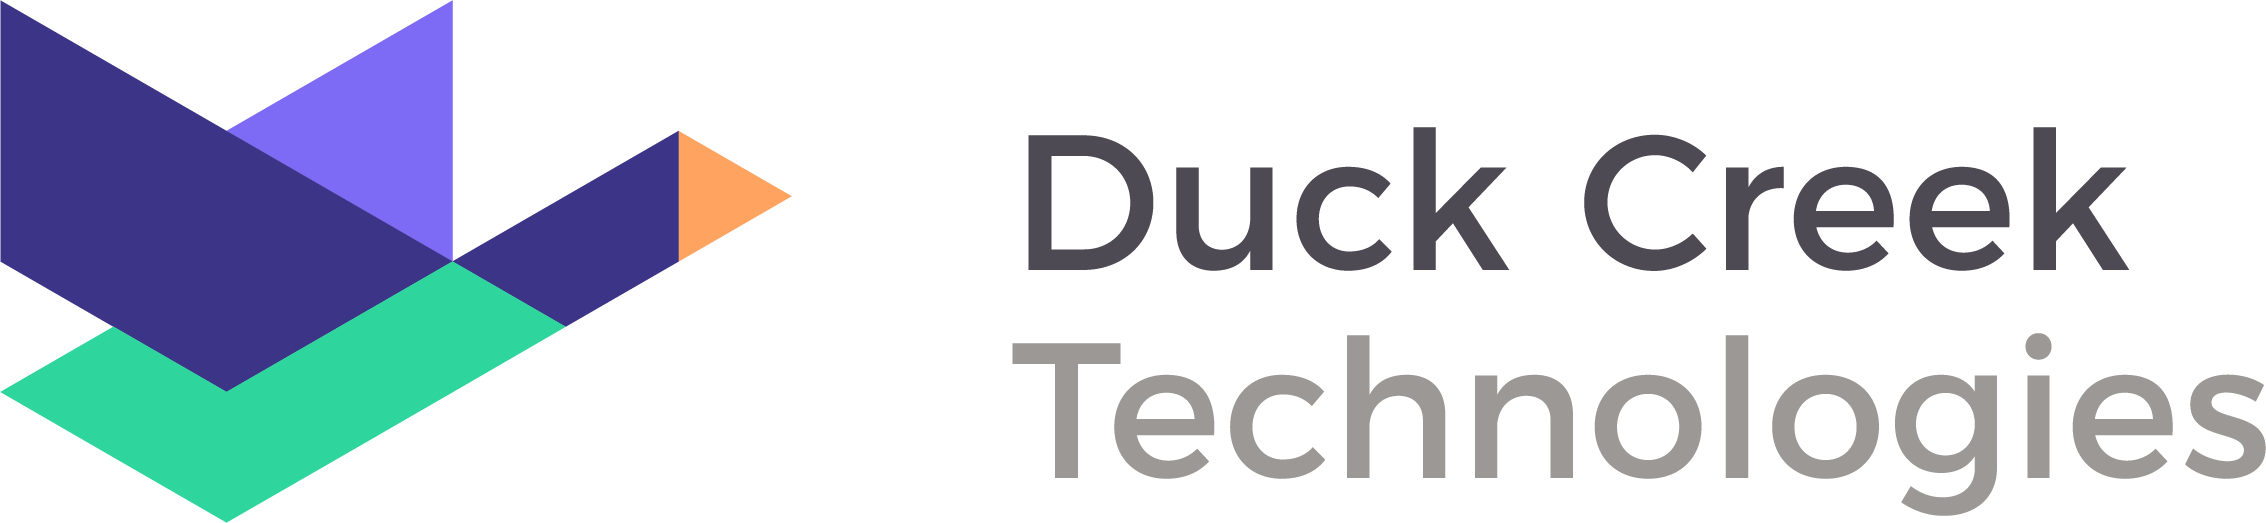 AcordPay Joins Duck 